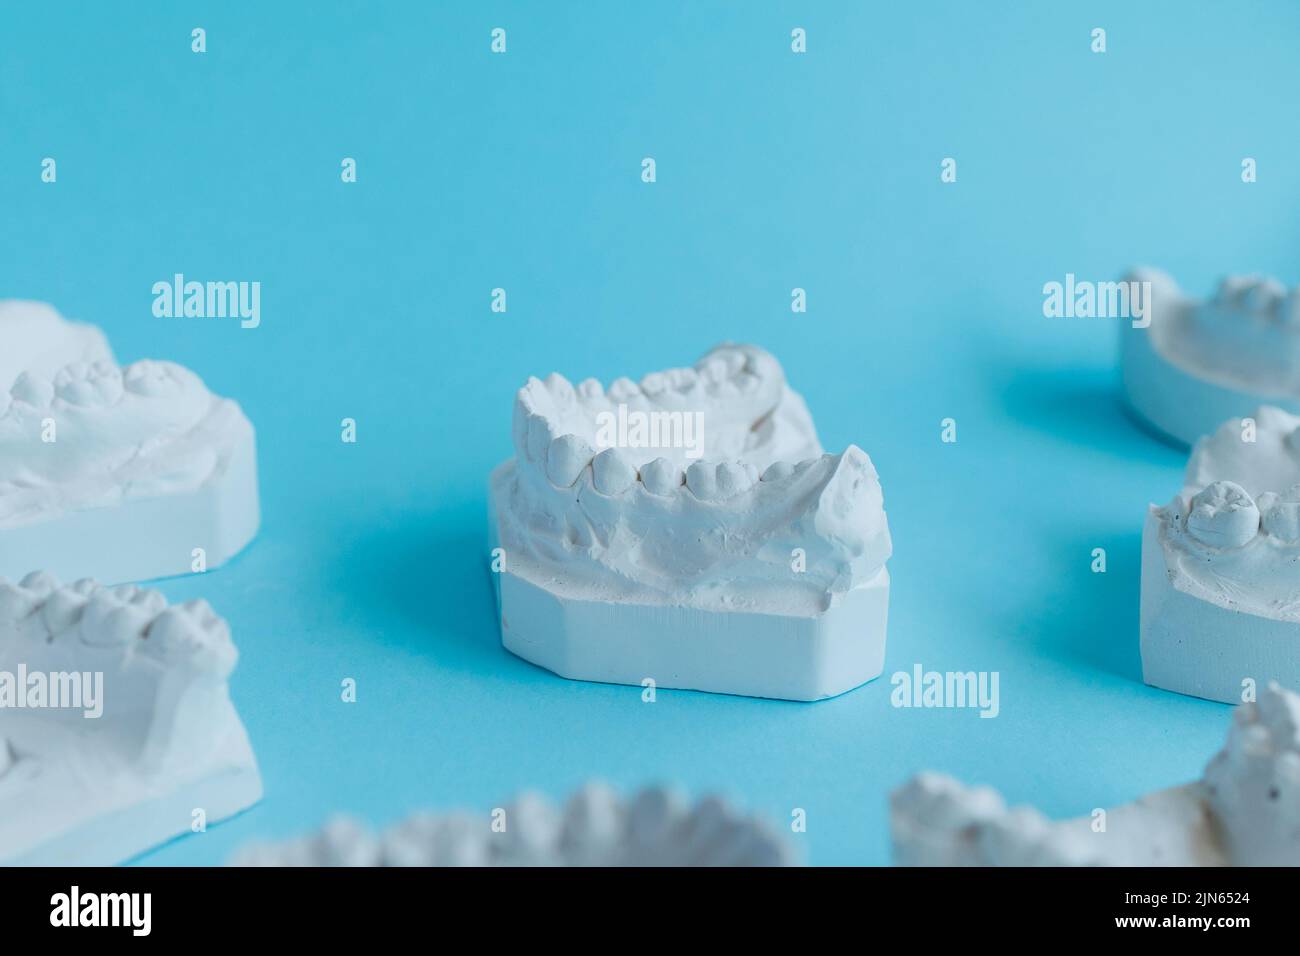 Gypsum model of teeth. Stomatologic plaster cast molds of human jaws on blue background. Dentistry and orthodontics concept Stock Photo